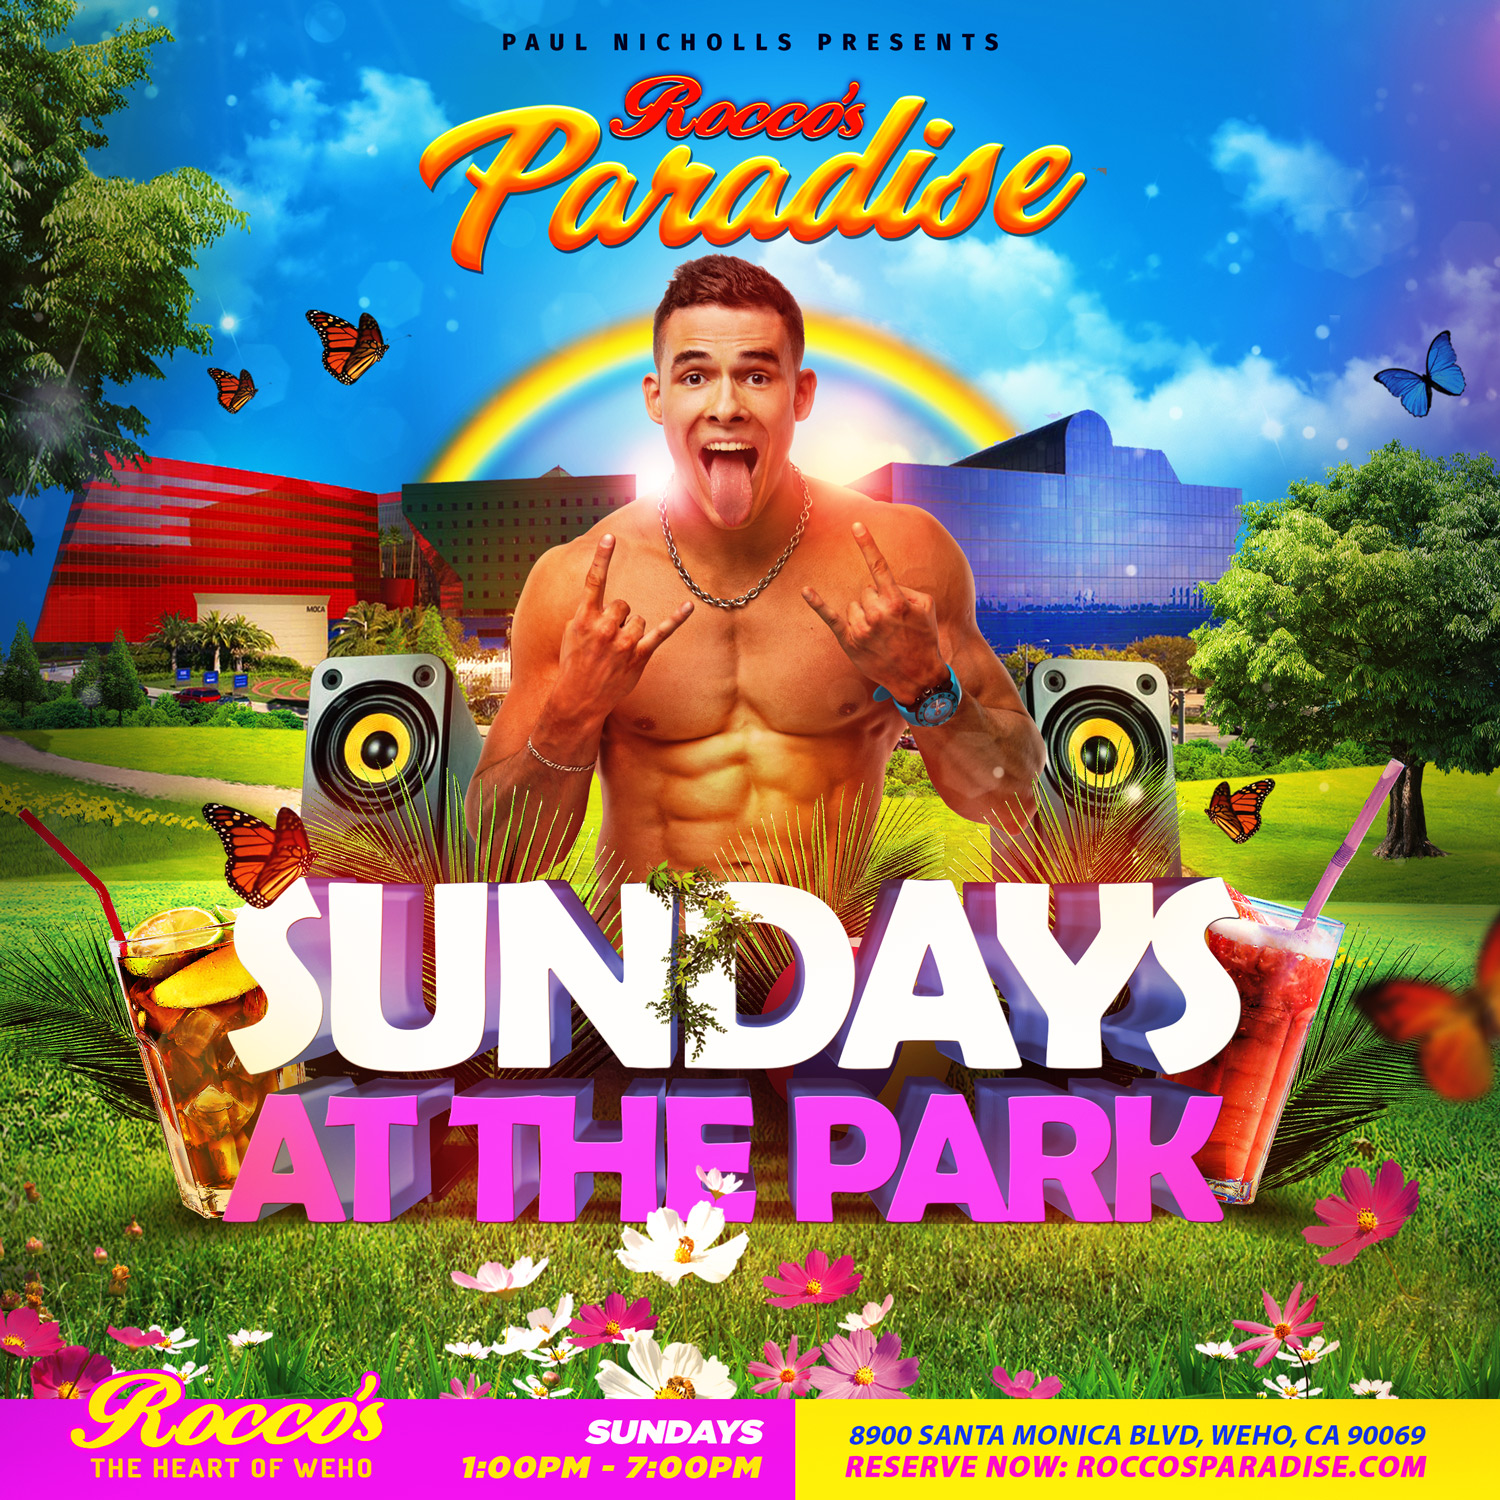 Buy Tickets to Sundays at the Park in West Hollywood on Oct 25, 2020